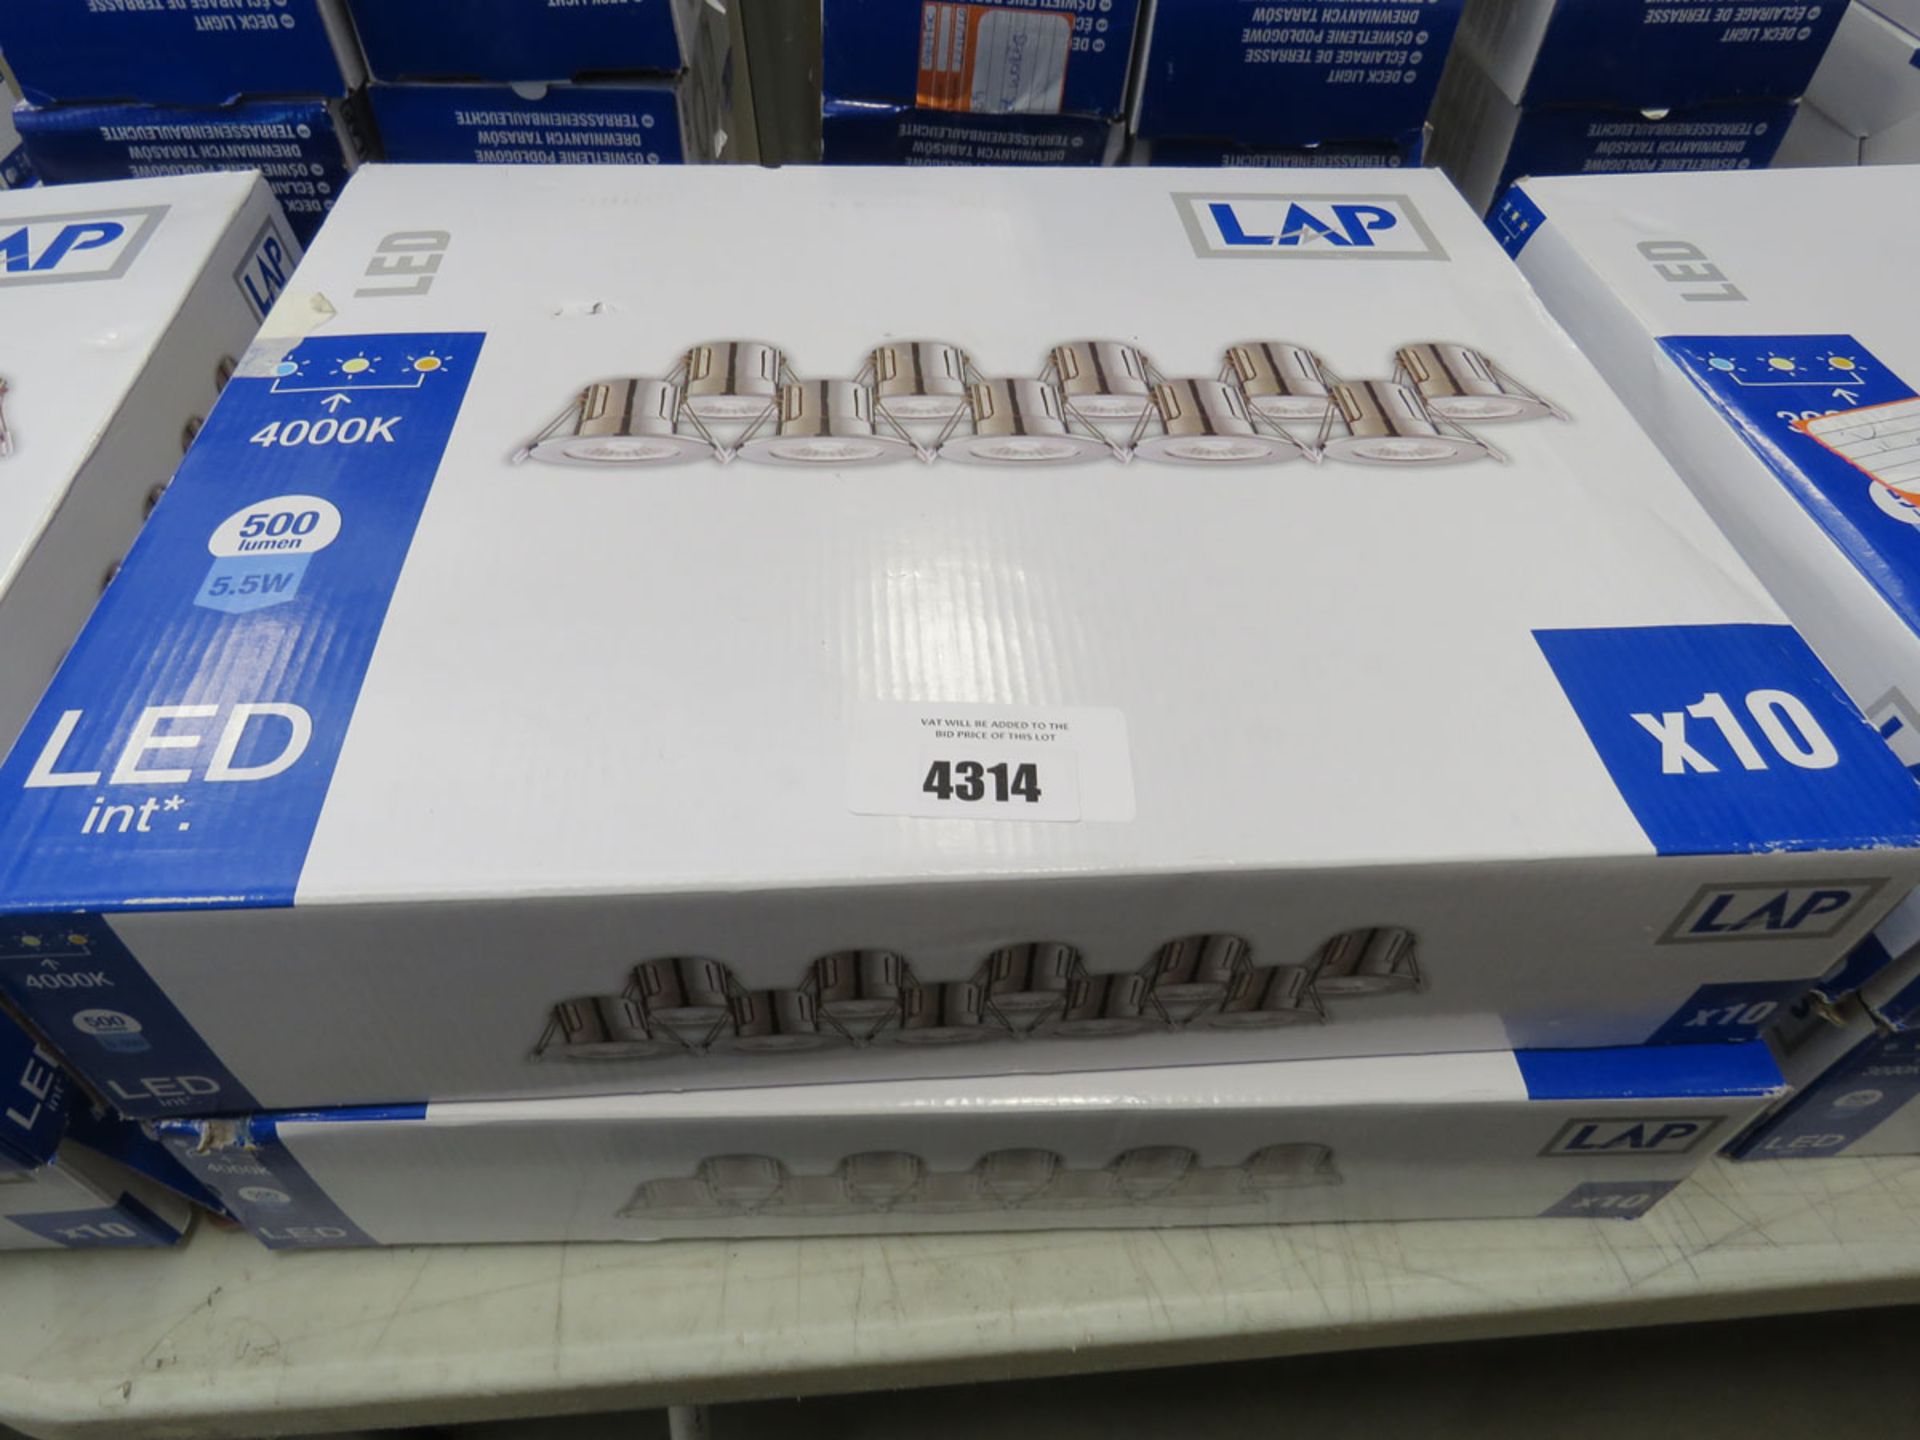 2 boxes of LAP LED down lights